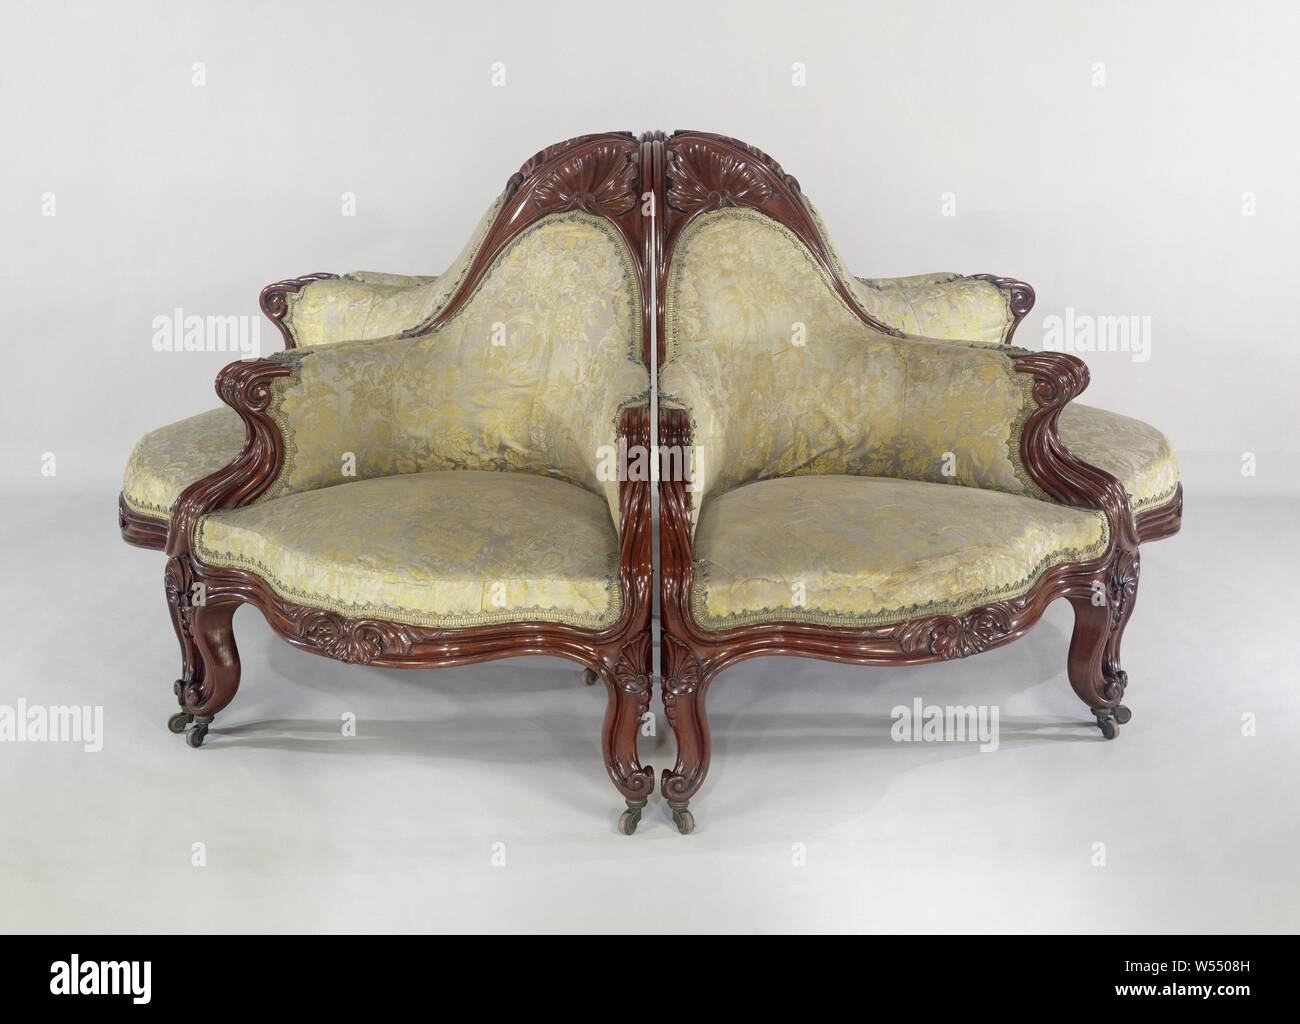 Armchair, part of an environmental divan, Armchair belonging to a set of six armchairs made of mahogany with a triangular base, forming a round sofa. Floral silk trim with trimmings. The two angled placed front legs, the rear leg, lines, struts, armrests and the crown of the backrest are bent, profiled and almost all end up in a volute. The armrests close the backrest in an arched shape and form a triangular crown that, like the fore-end and the swellings of the front legs, has shell-shaped acanthus leaves., Gebroeders Horrix, The Hague, c. 1852, wood (plant material), mahogany (wood), silk Stock Photo